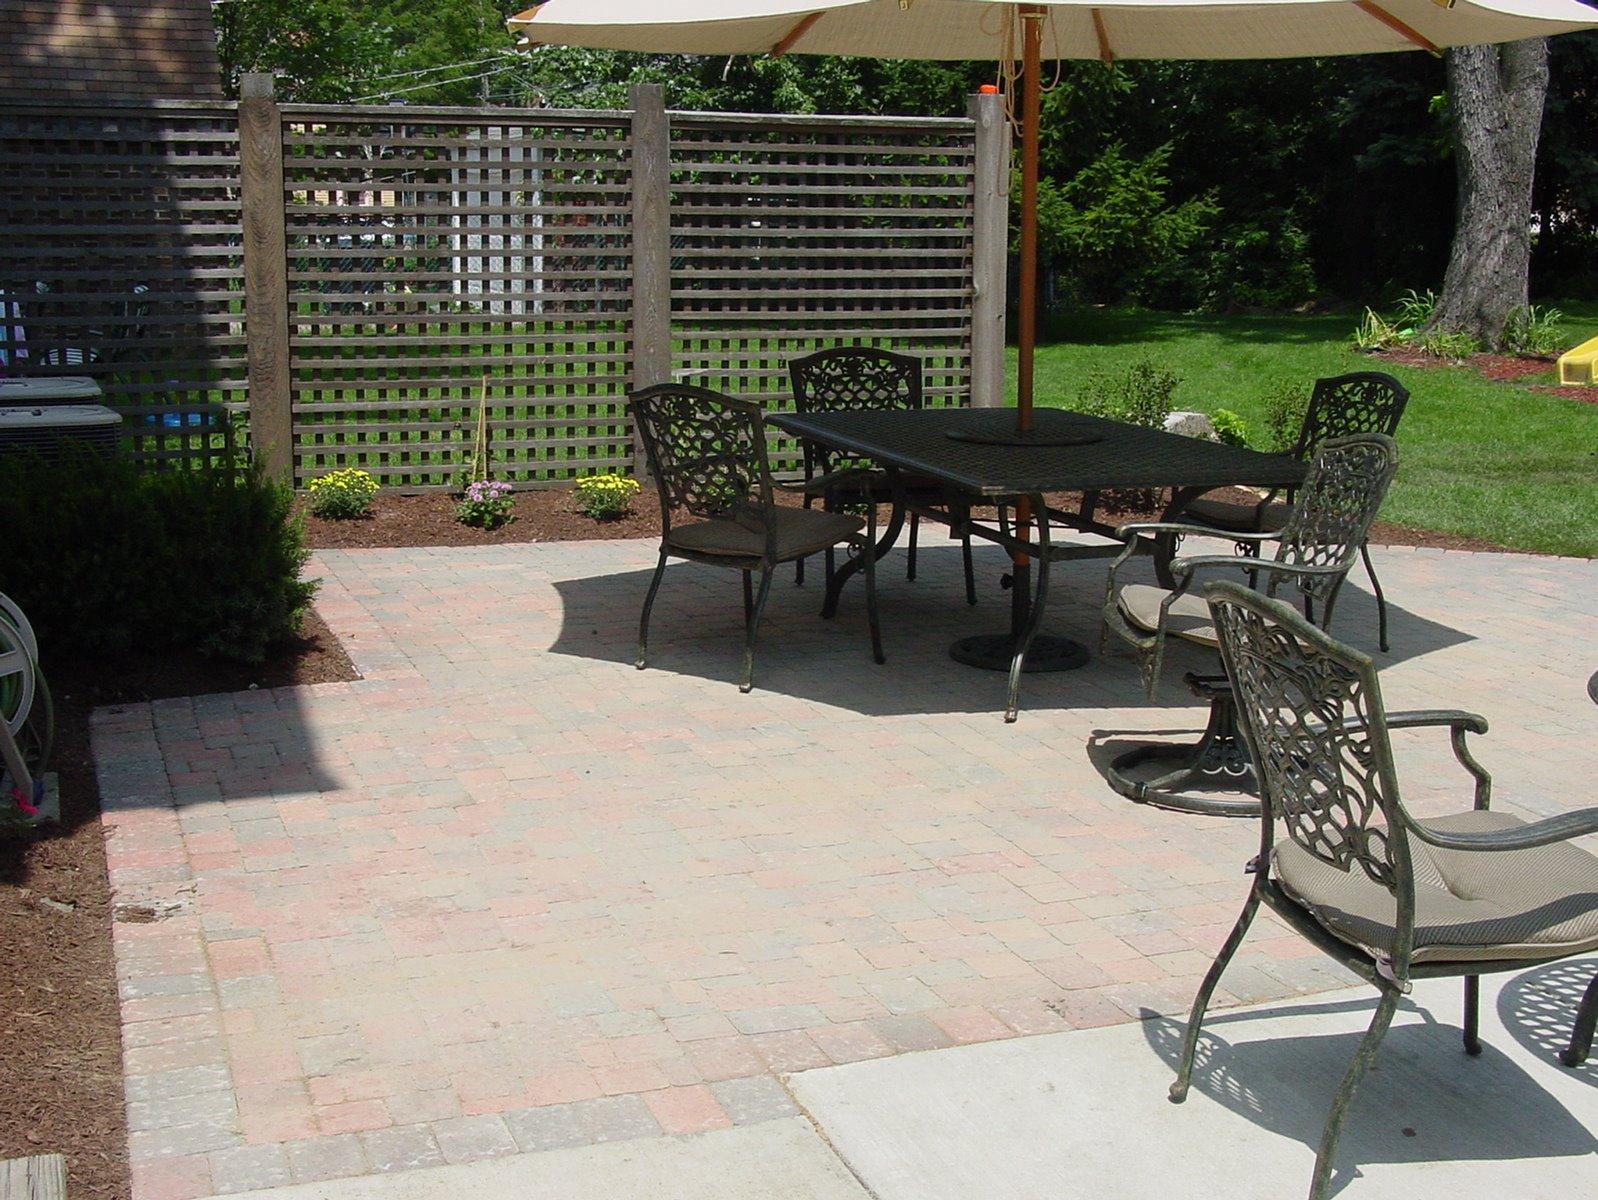 spring into action with this NEW PATIO